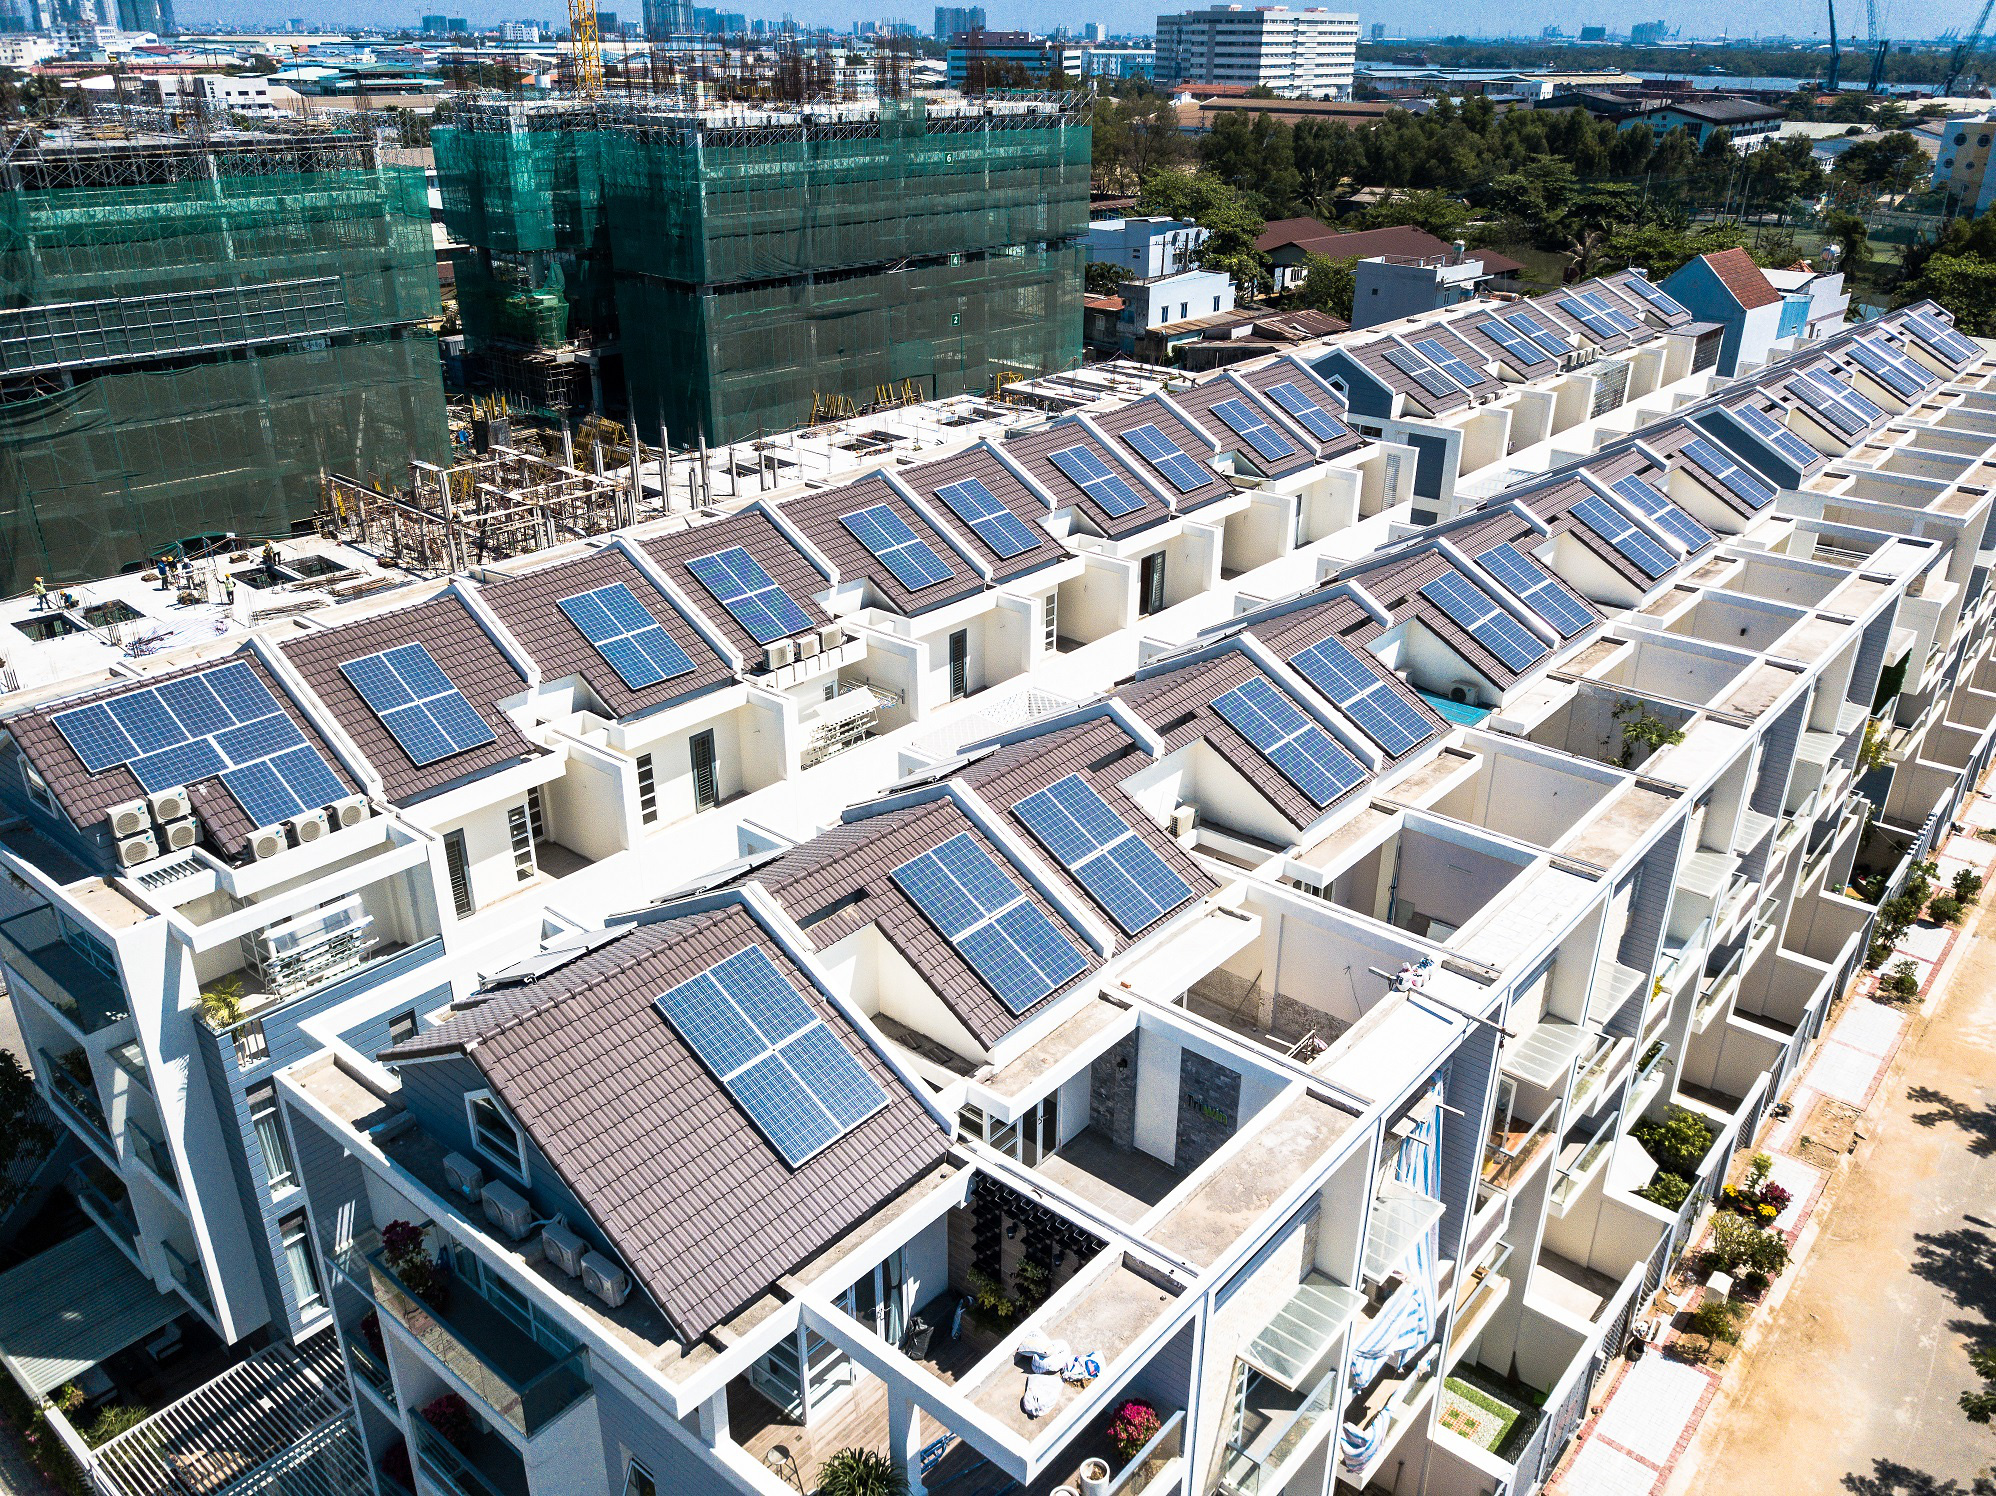 Military-owned company partners with private firm to develop smarthomes, solar energy in Vietnam